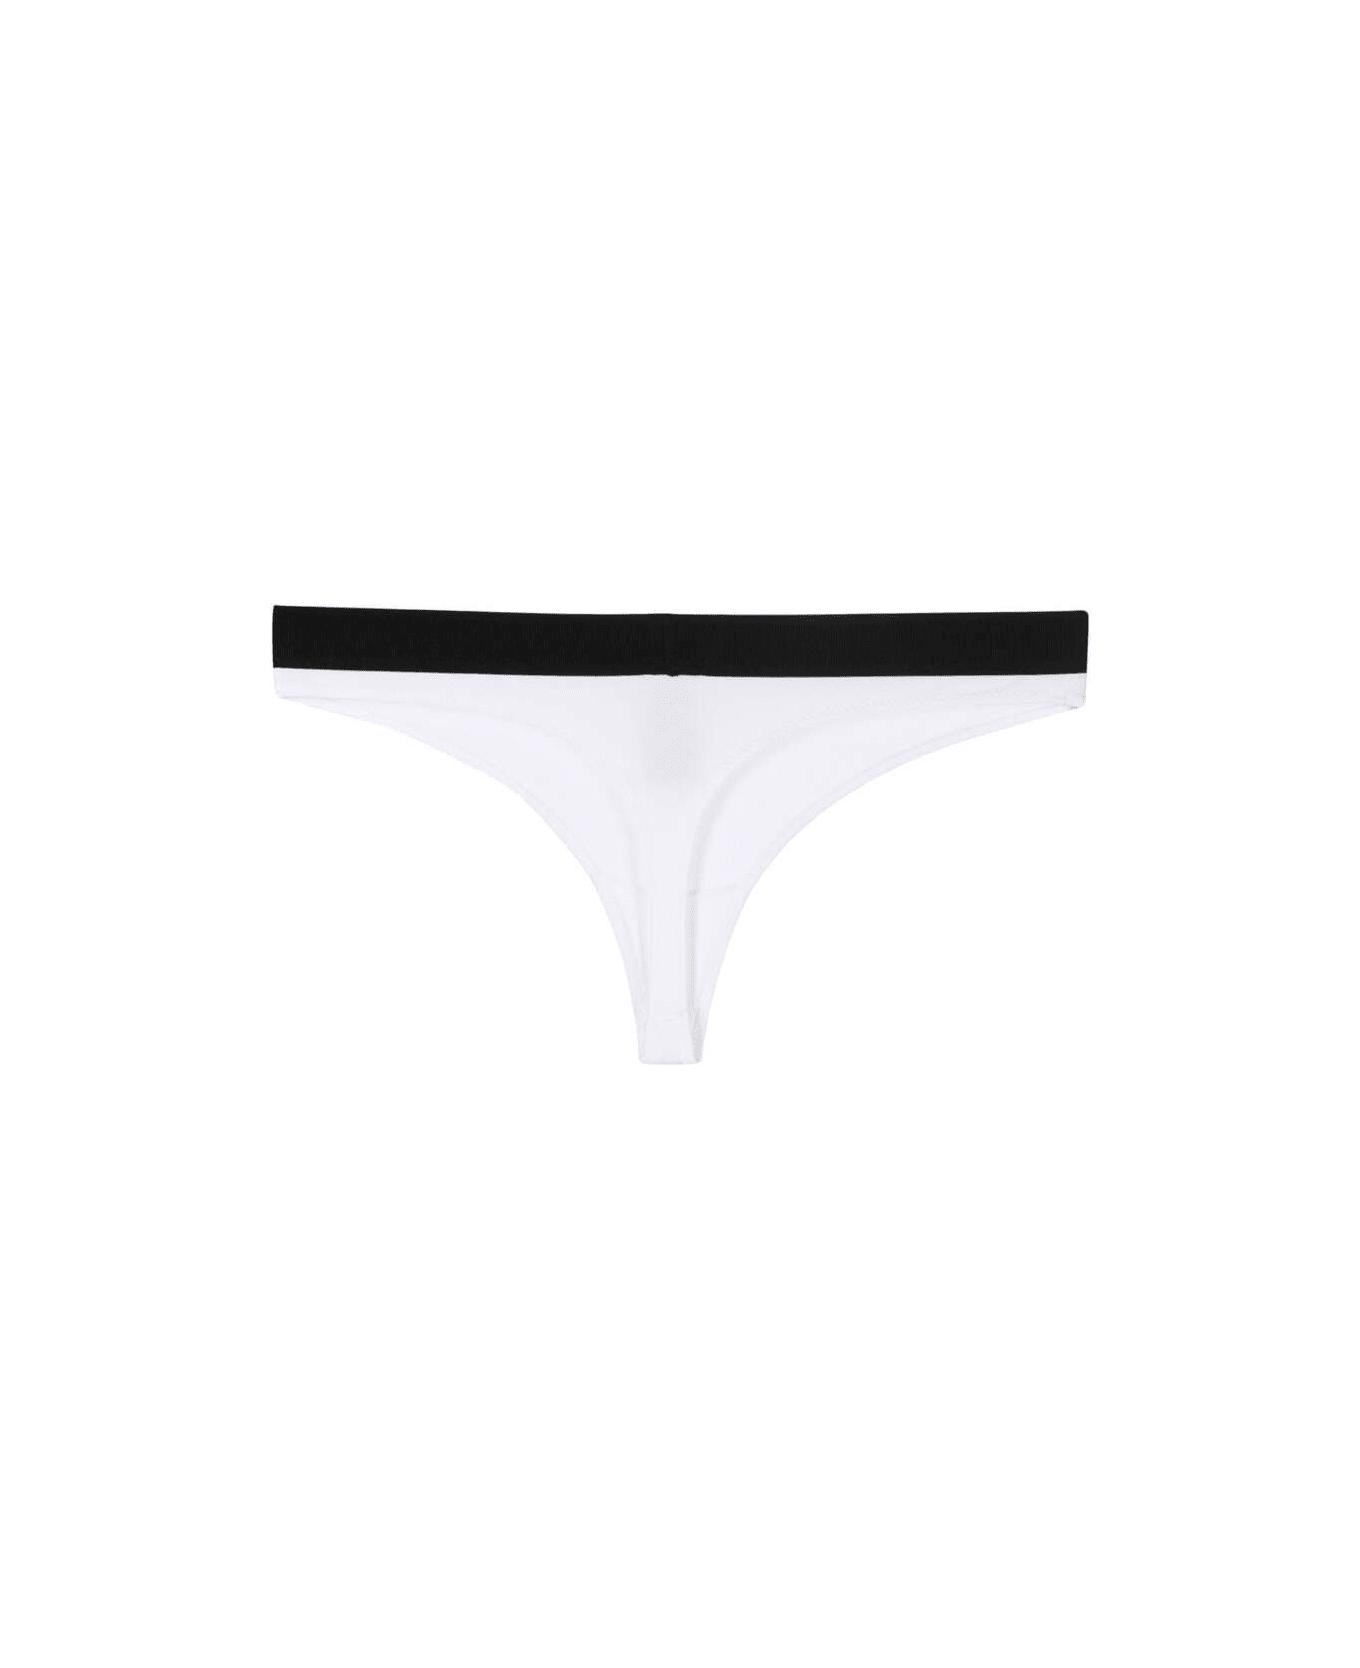 Tom Ford 'signature' White Thong With Branded Waistband In Stretch Modal Woman - White